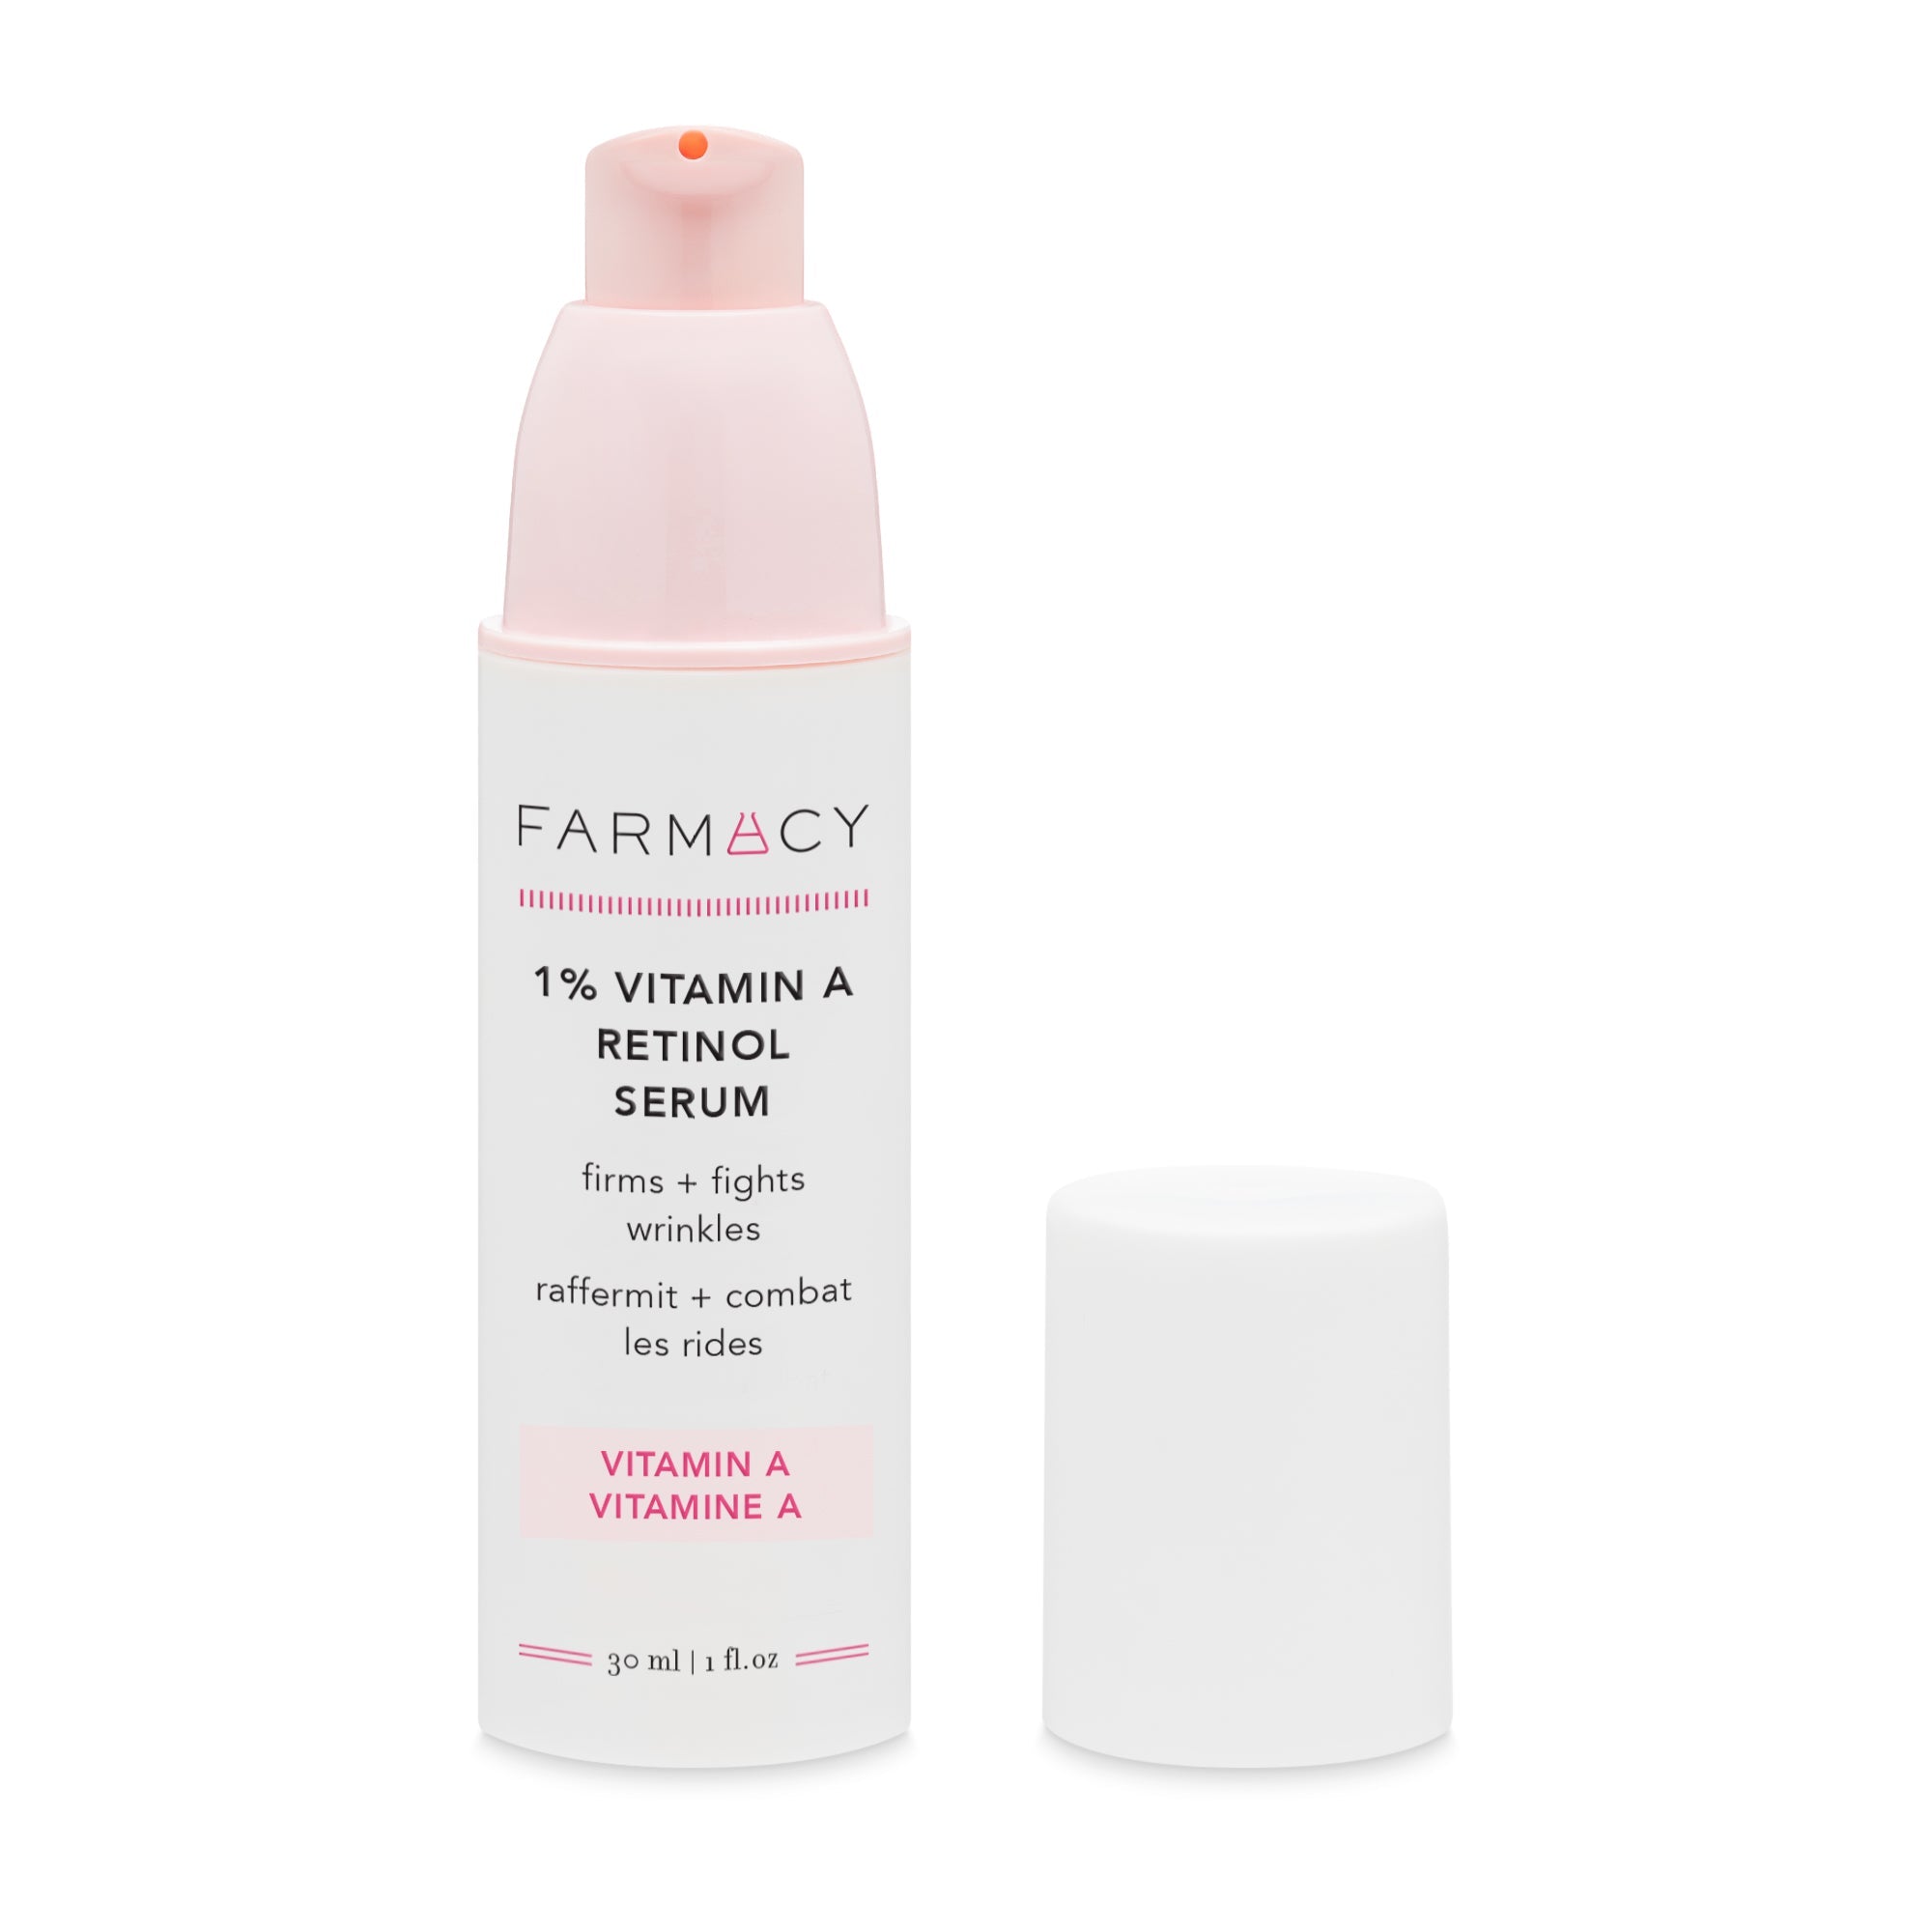 1% Vitamin A Retinol Serum packaging in its cylinder container with the cap off